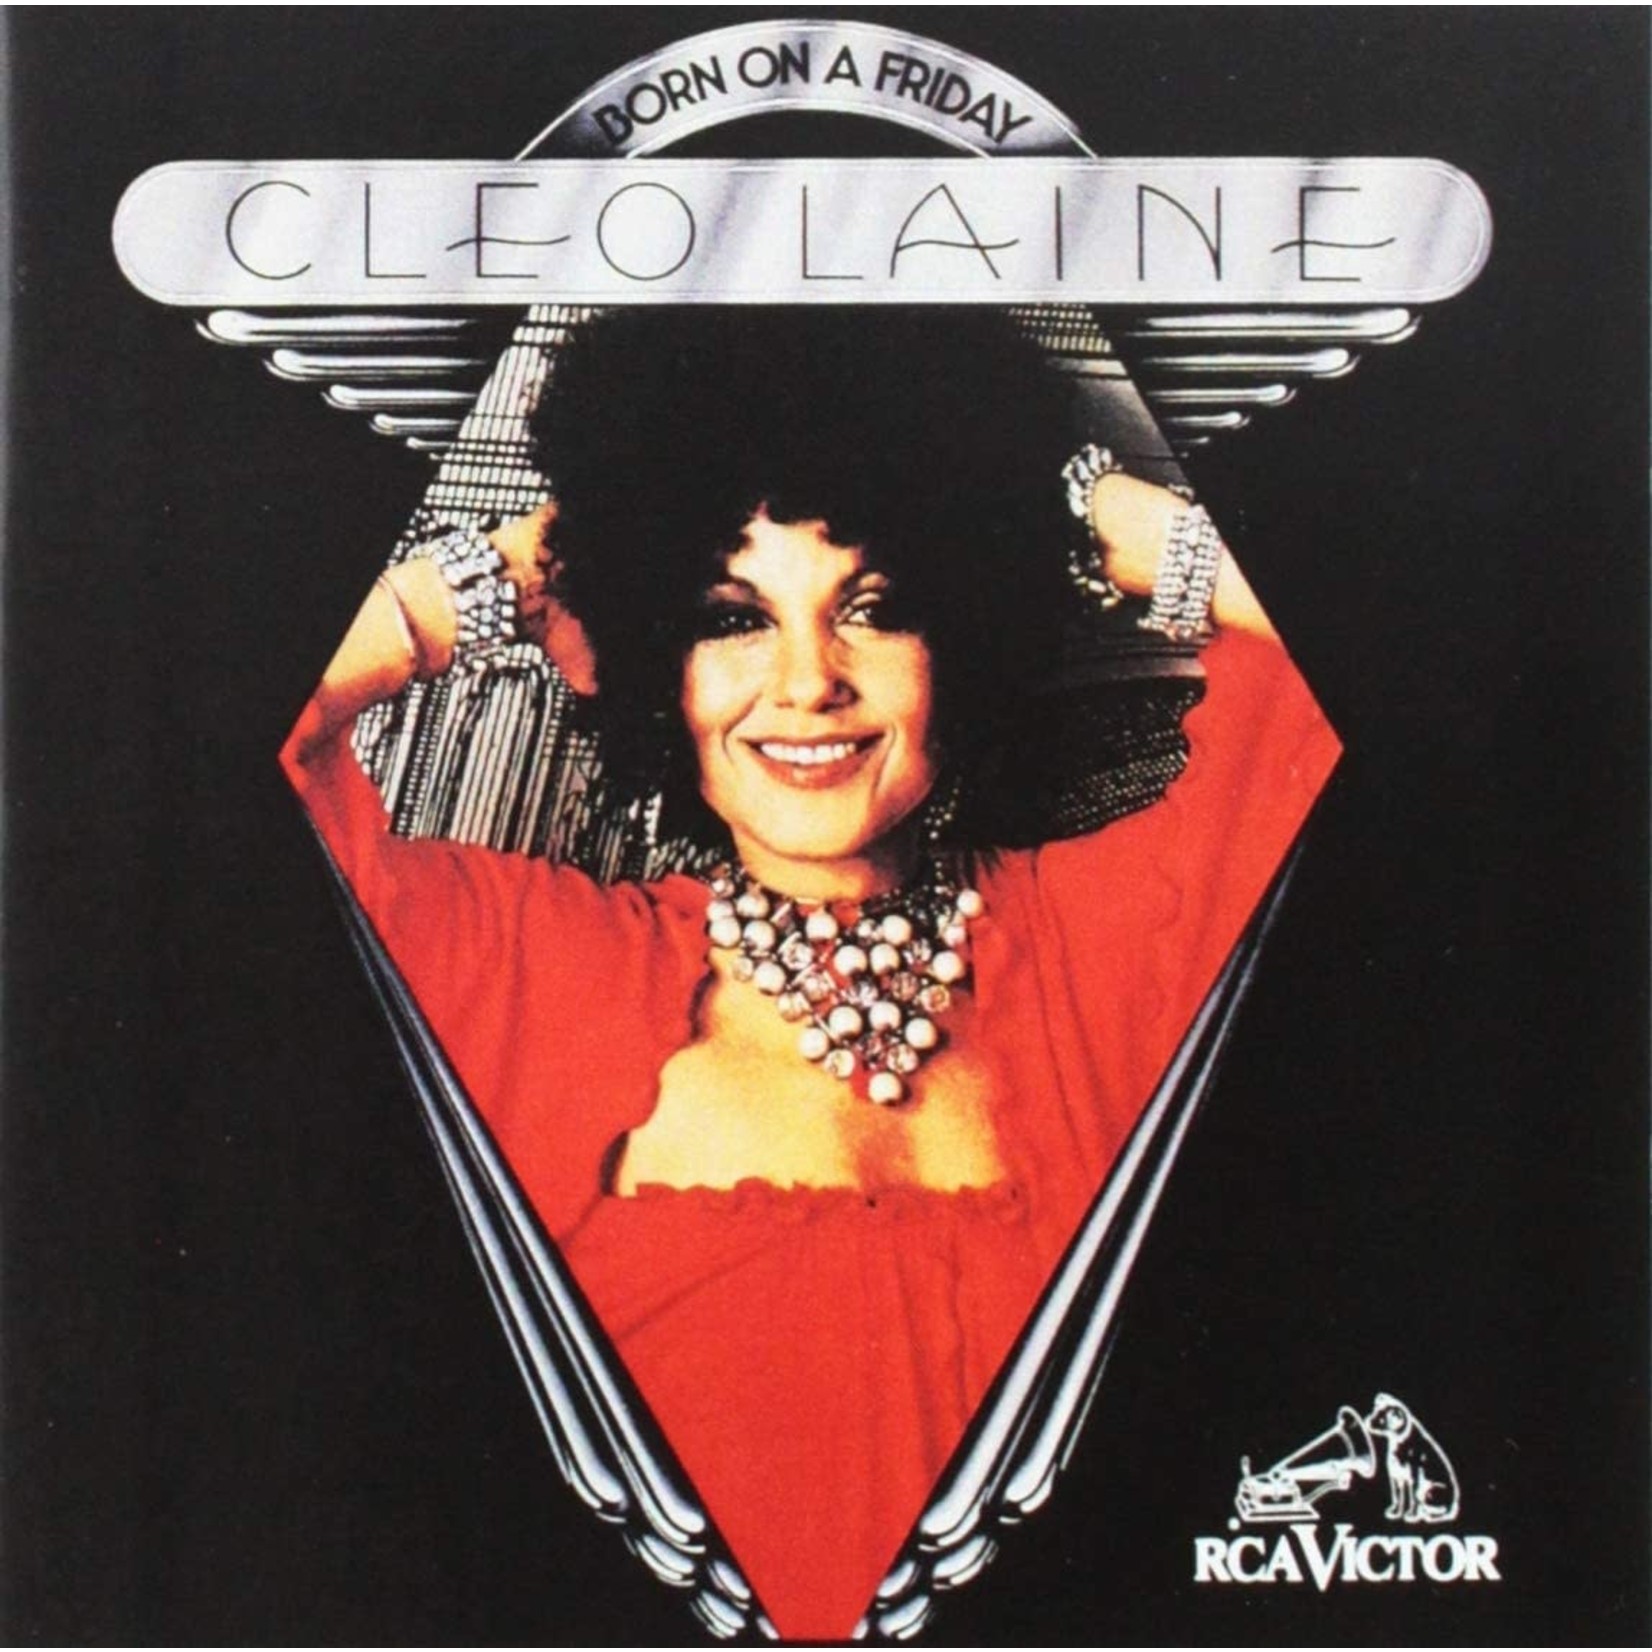 [Discontinued] Cleo Laine - Born on a Friday